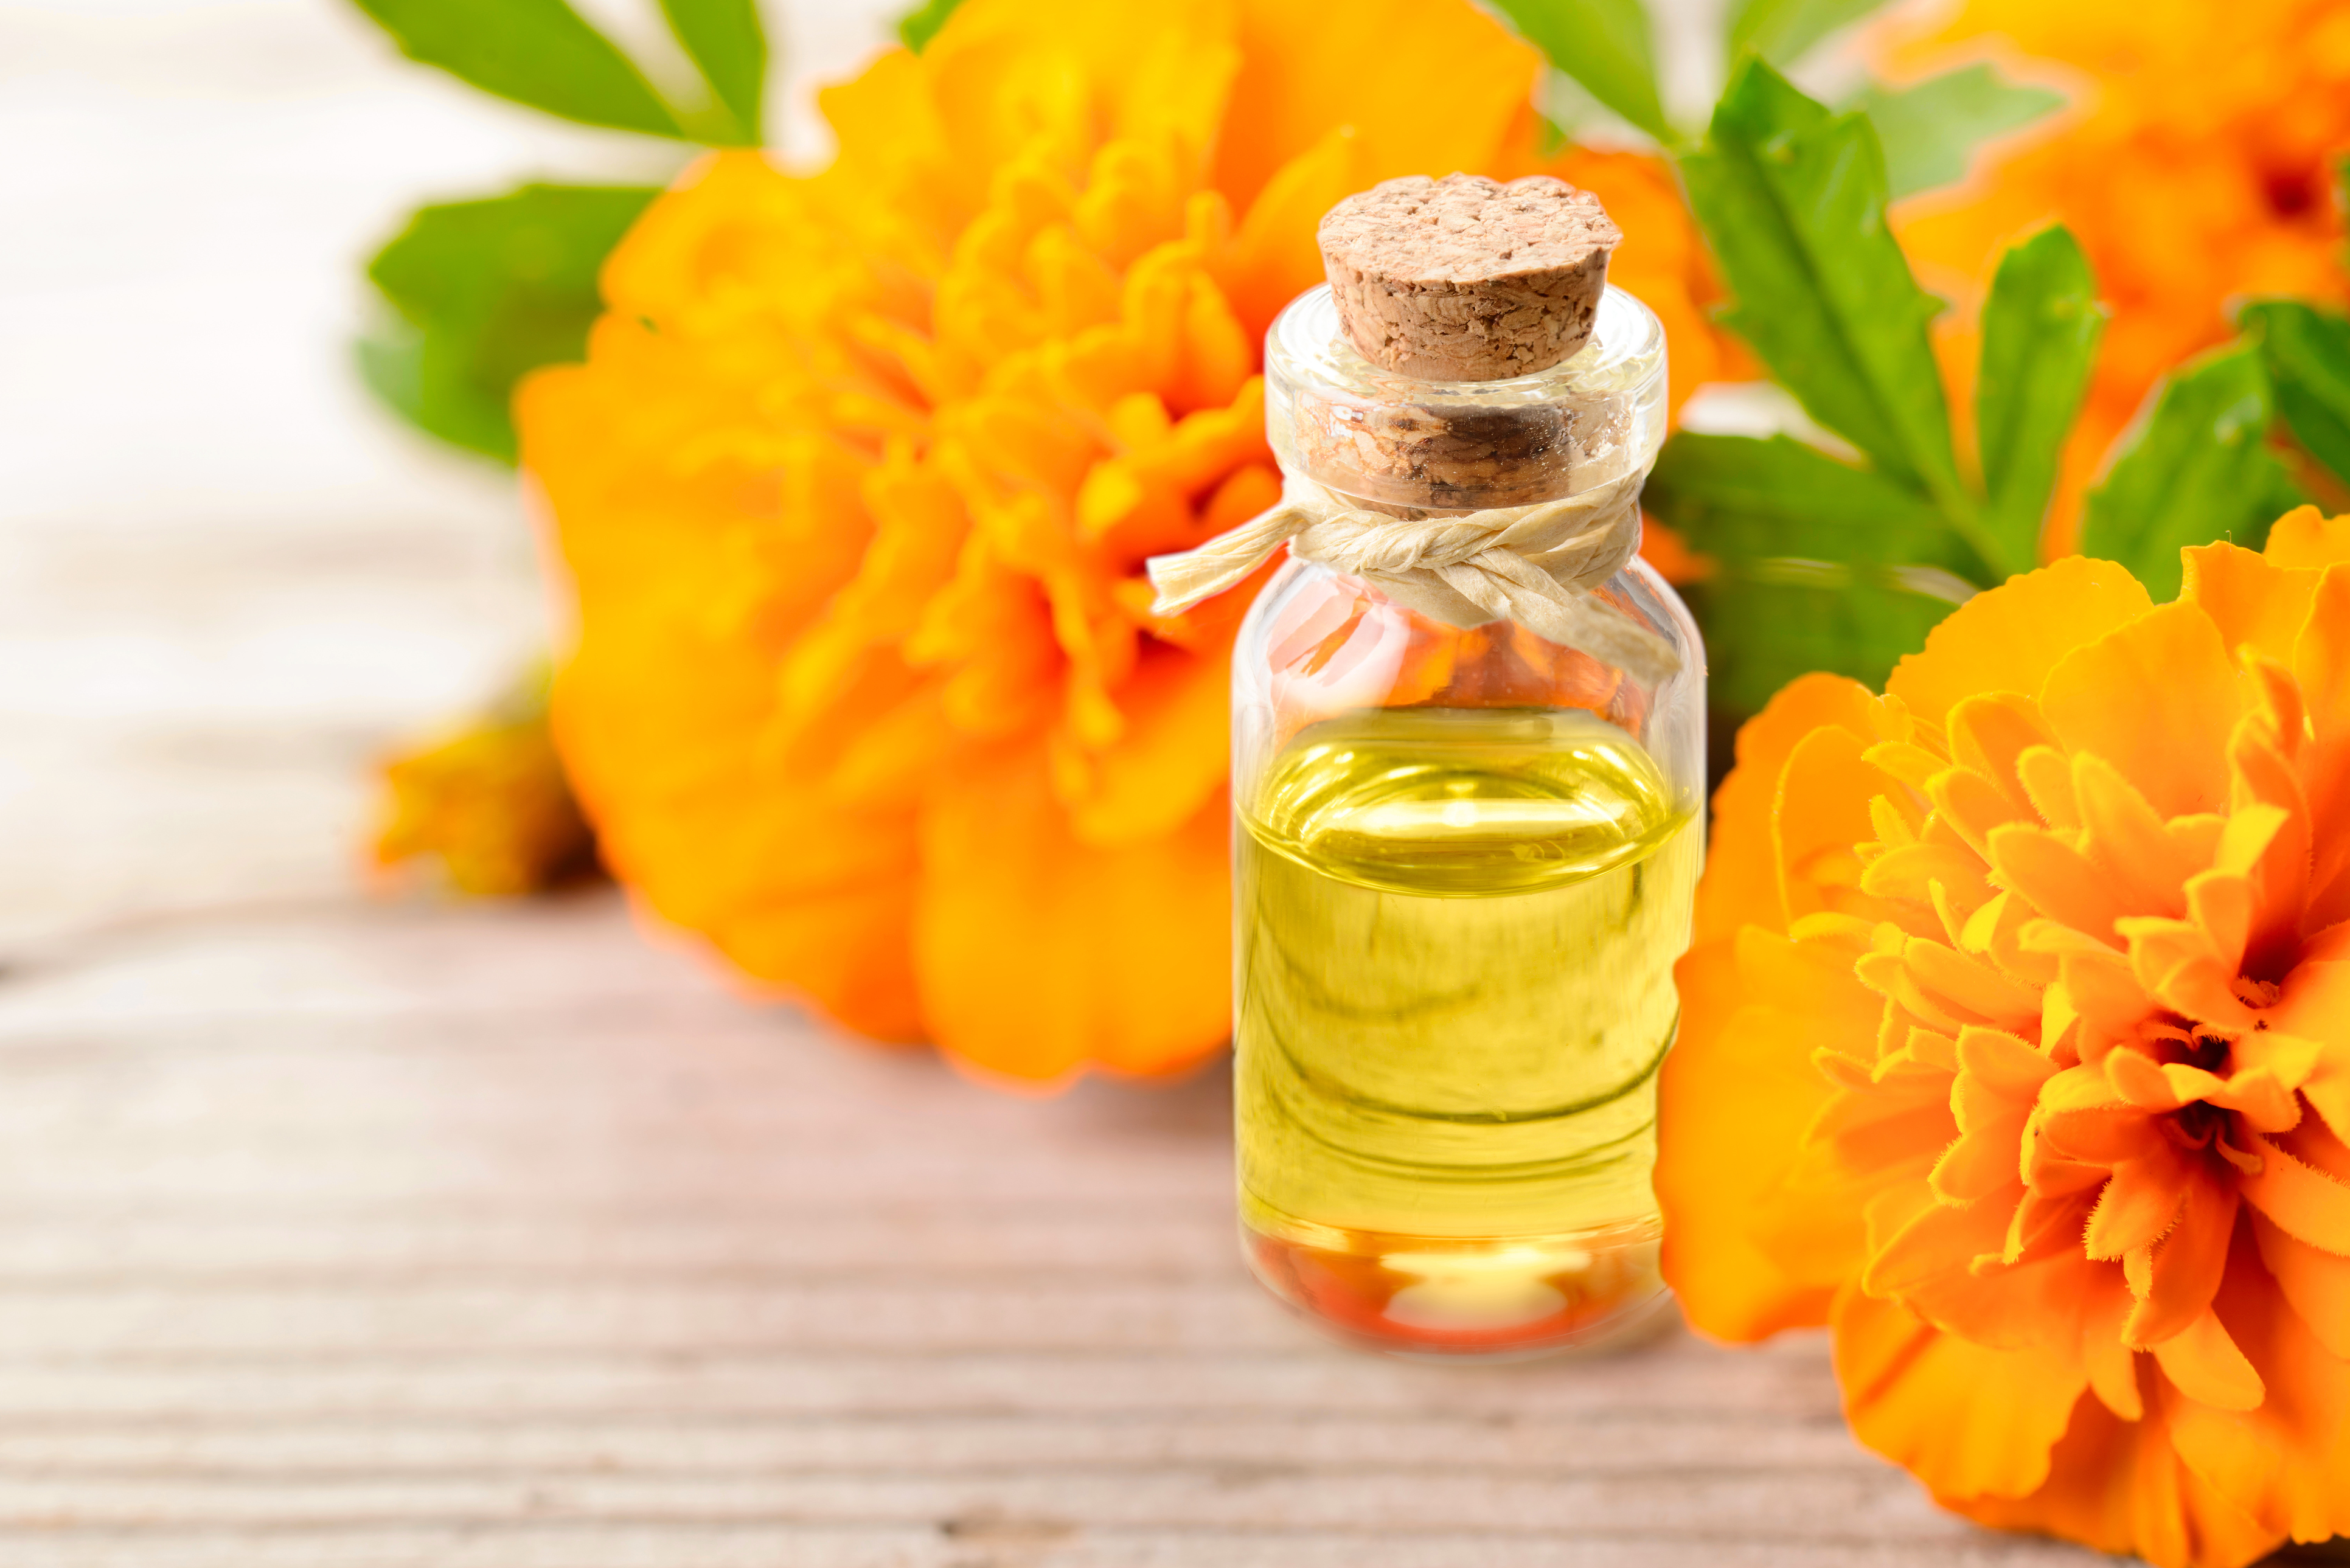 Tagetes essential oil can be a skin soother. (Thinkstock/PA)